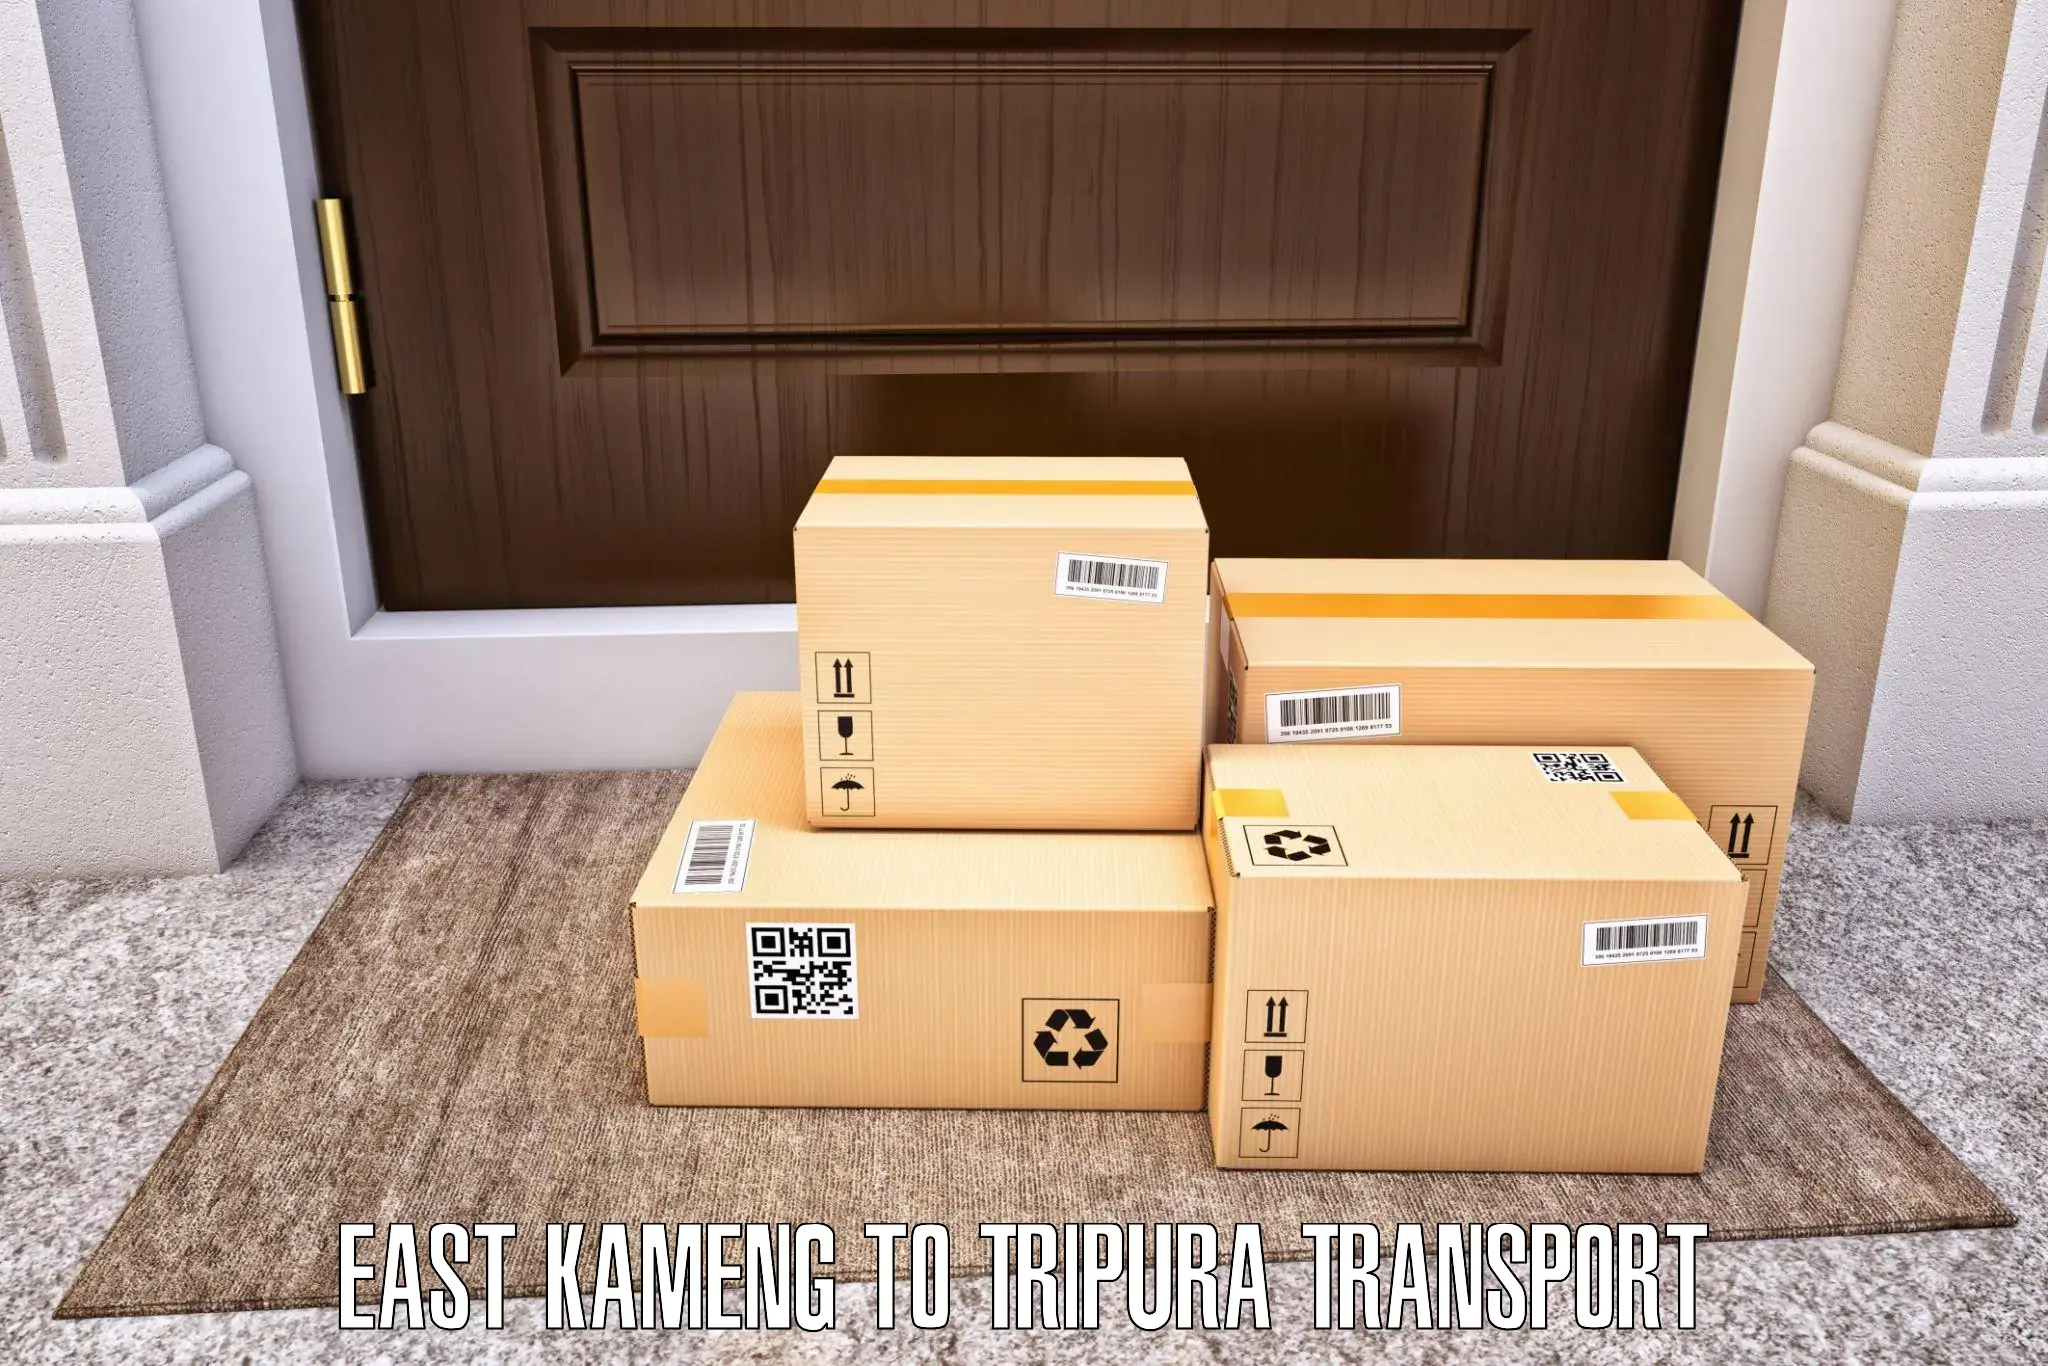 Daily transport service East Kameng to Teliamura